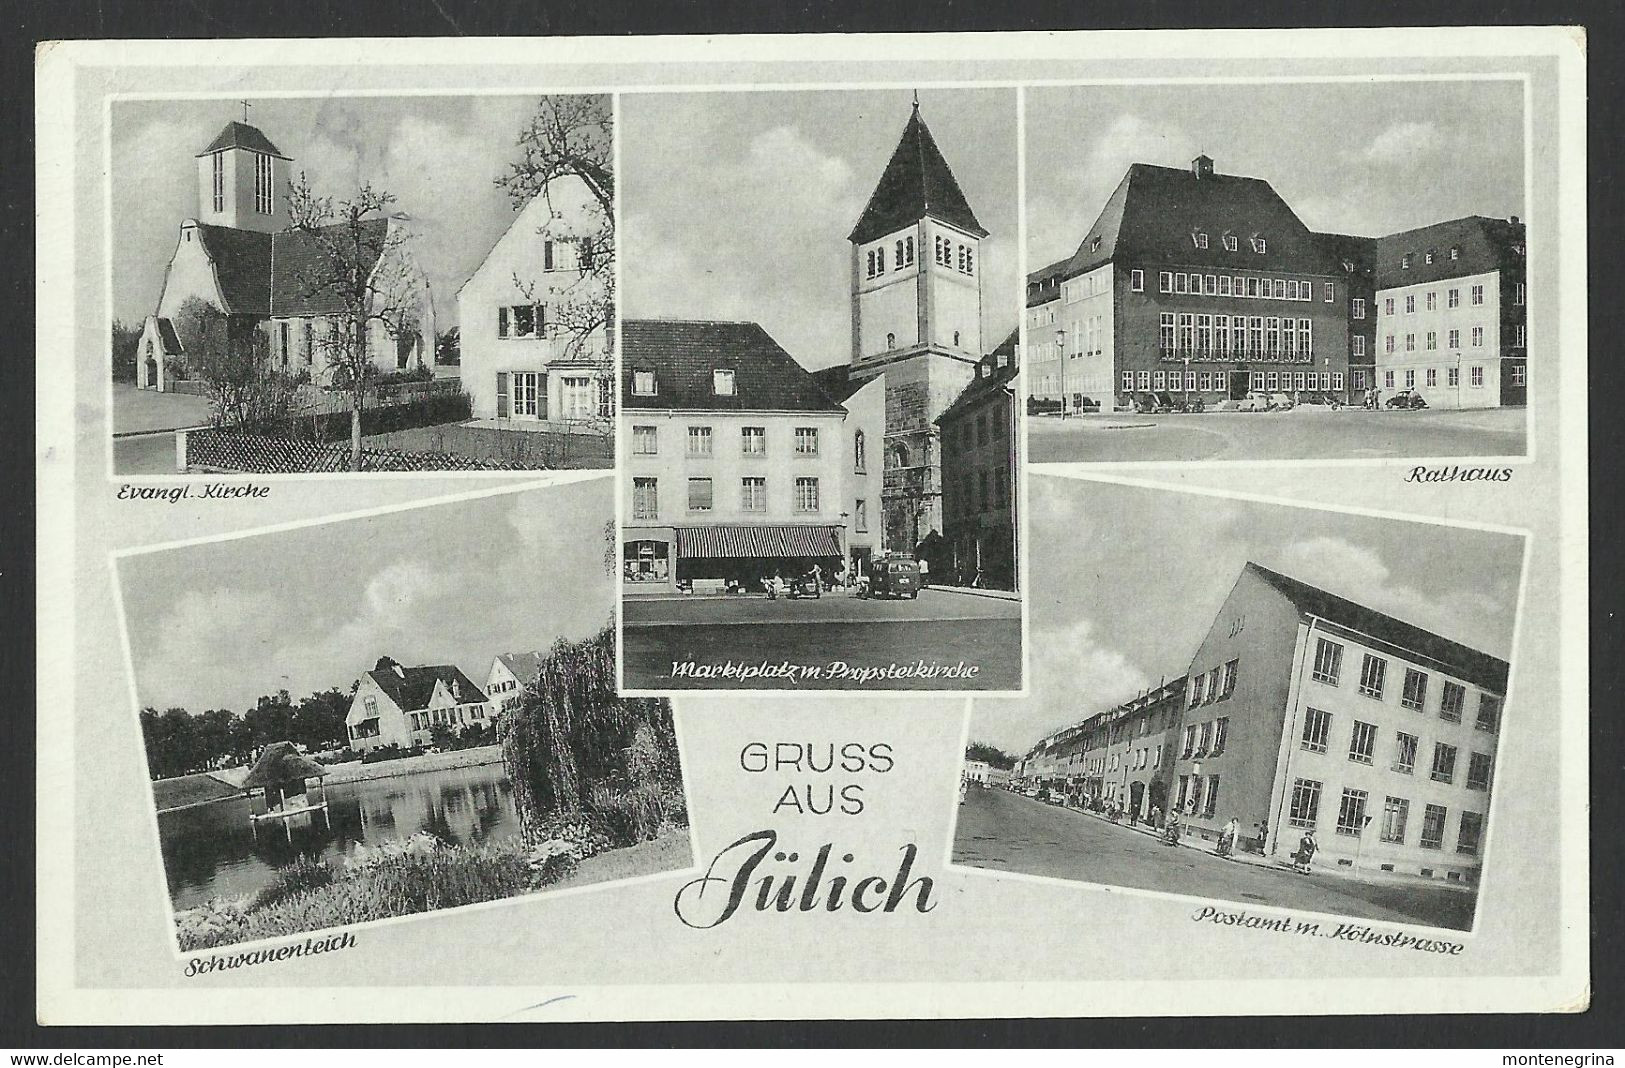 JULICH - Collage More Pictures - Old Postcard (see Sales Conditions) 06507 - Jülich